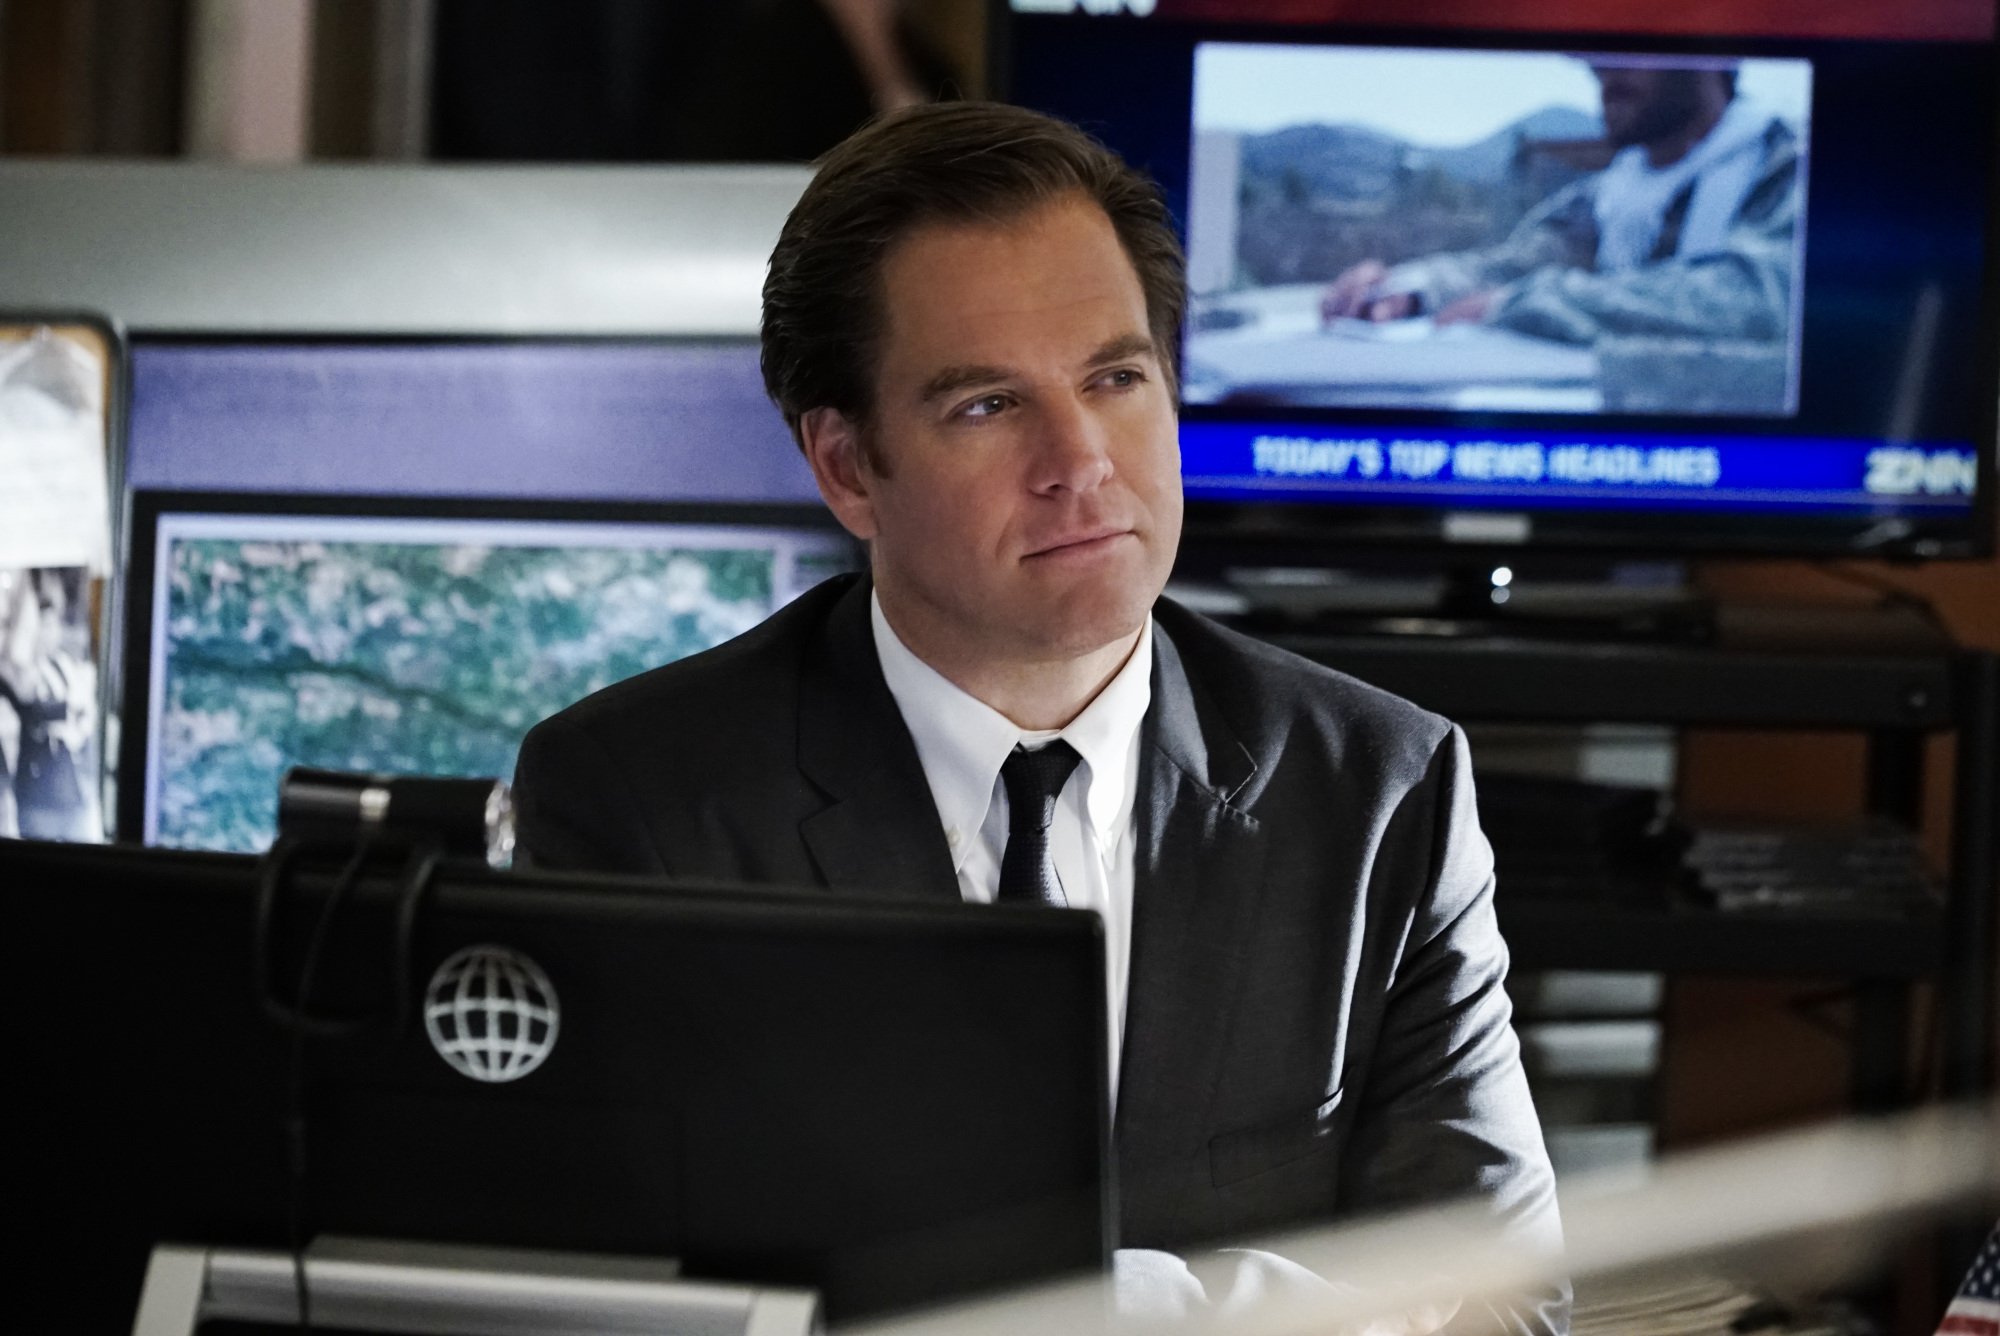 Michael Weatherly as Tony DiNozzo on the set of 'NCIS' during season 13 in 2016